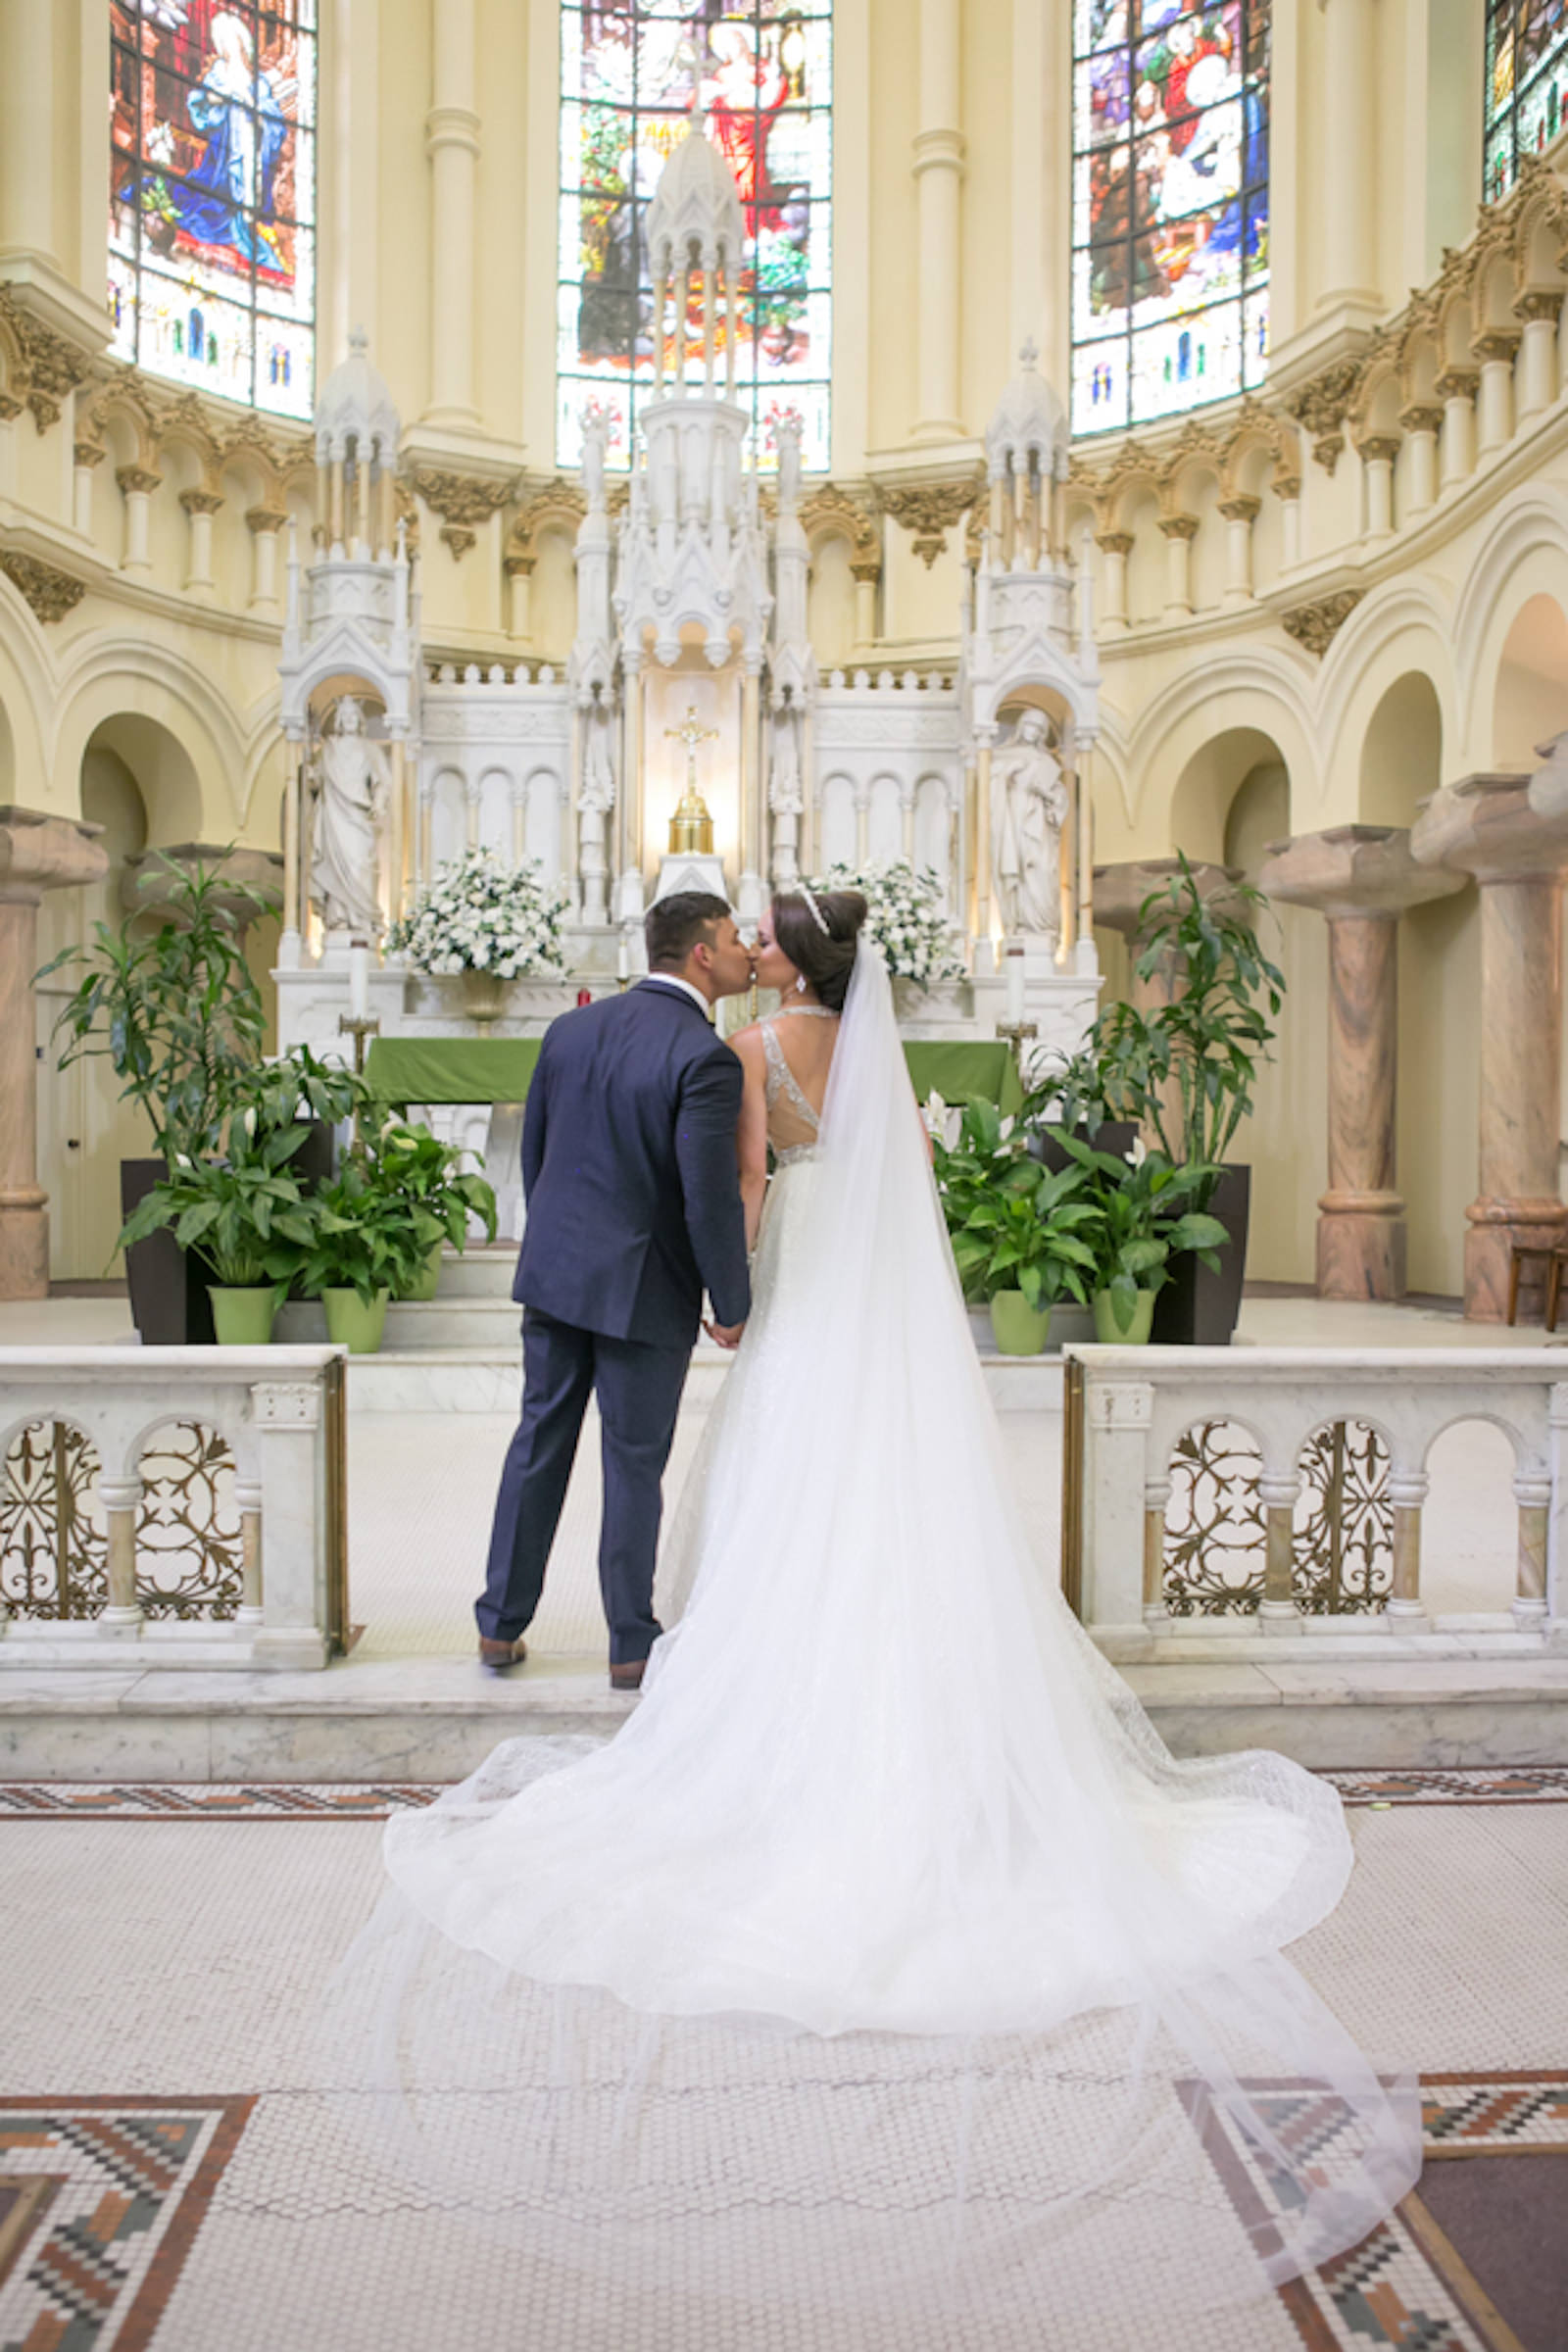 Indoor Downtown Tampa Bride and Groom Portrait at Traditional Catholic Ceremony Cathedral Church | V Neck Illusion Lace A Line Ballgown Wedding Dress with Rhinestone Waist Band and Cathedral Veil | Carrie Wildes Photography